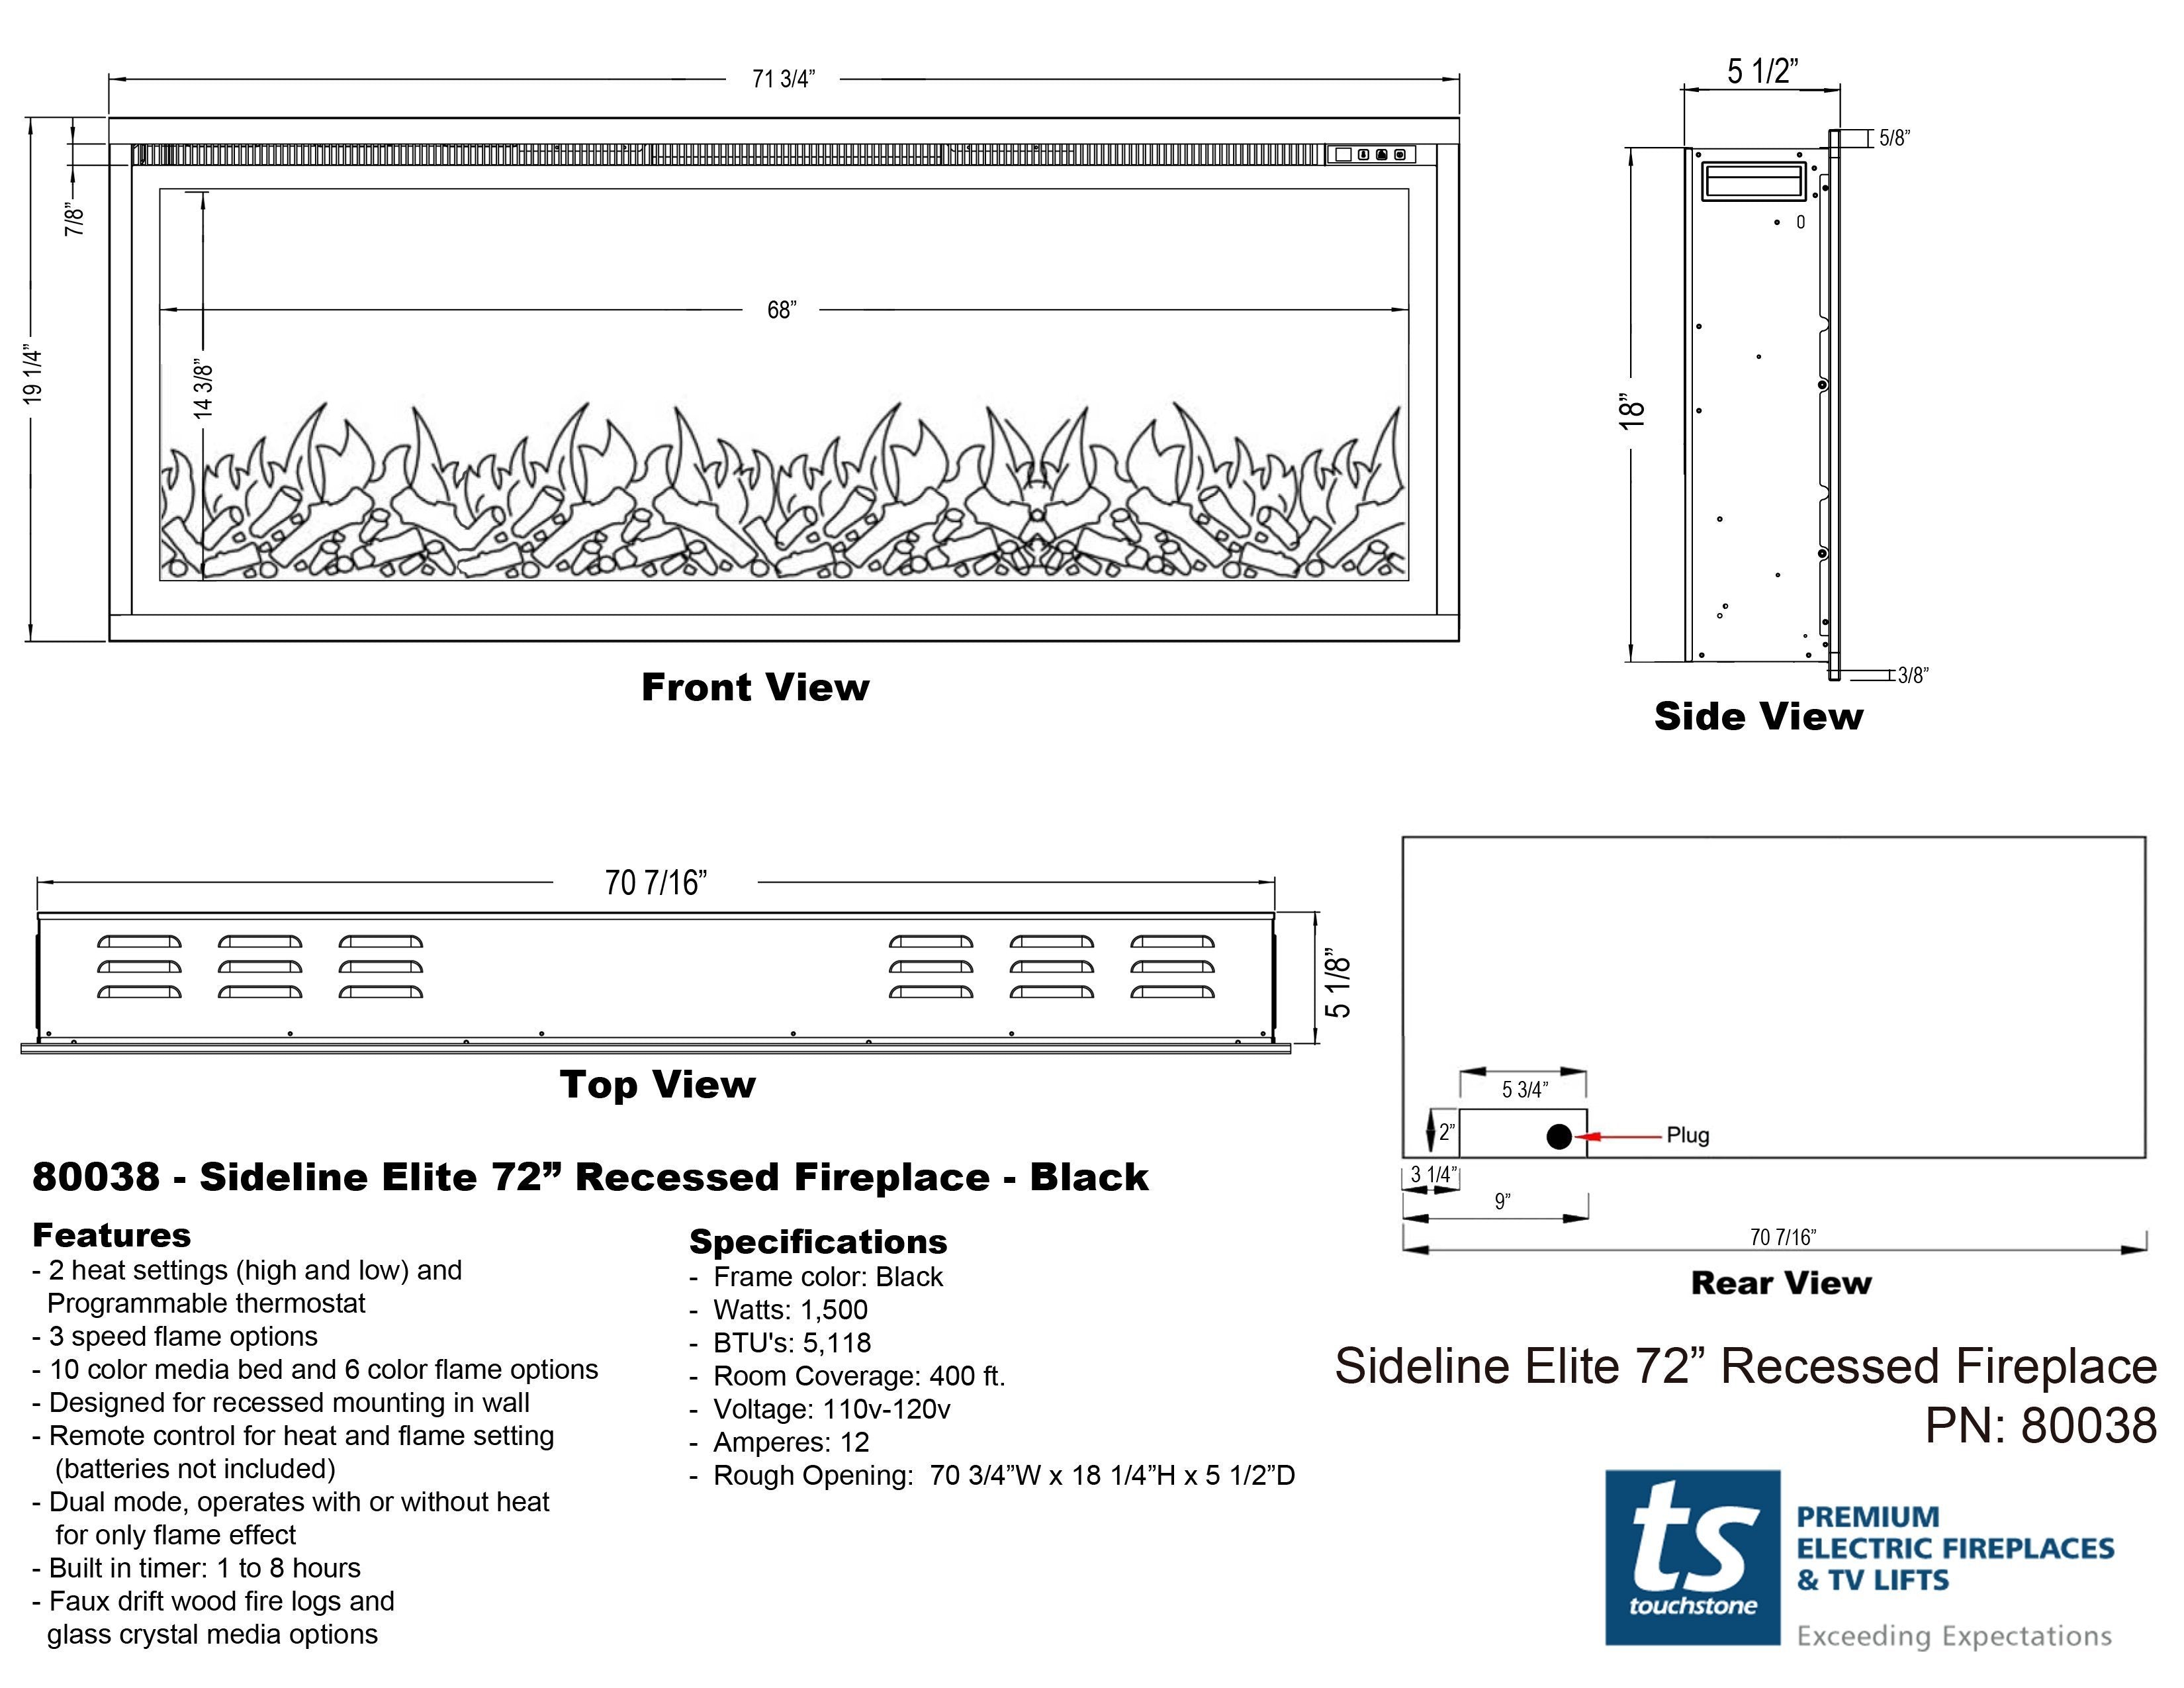 Sideline Elite 72 Refurbished Recessed Electric Fireplace specifications.